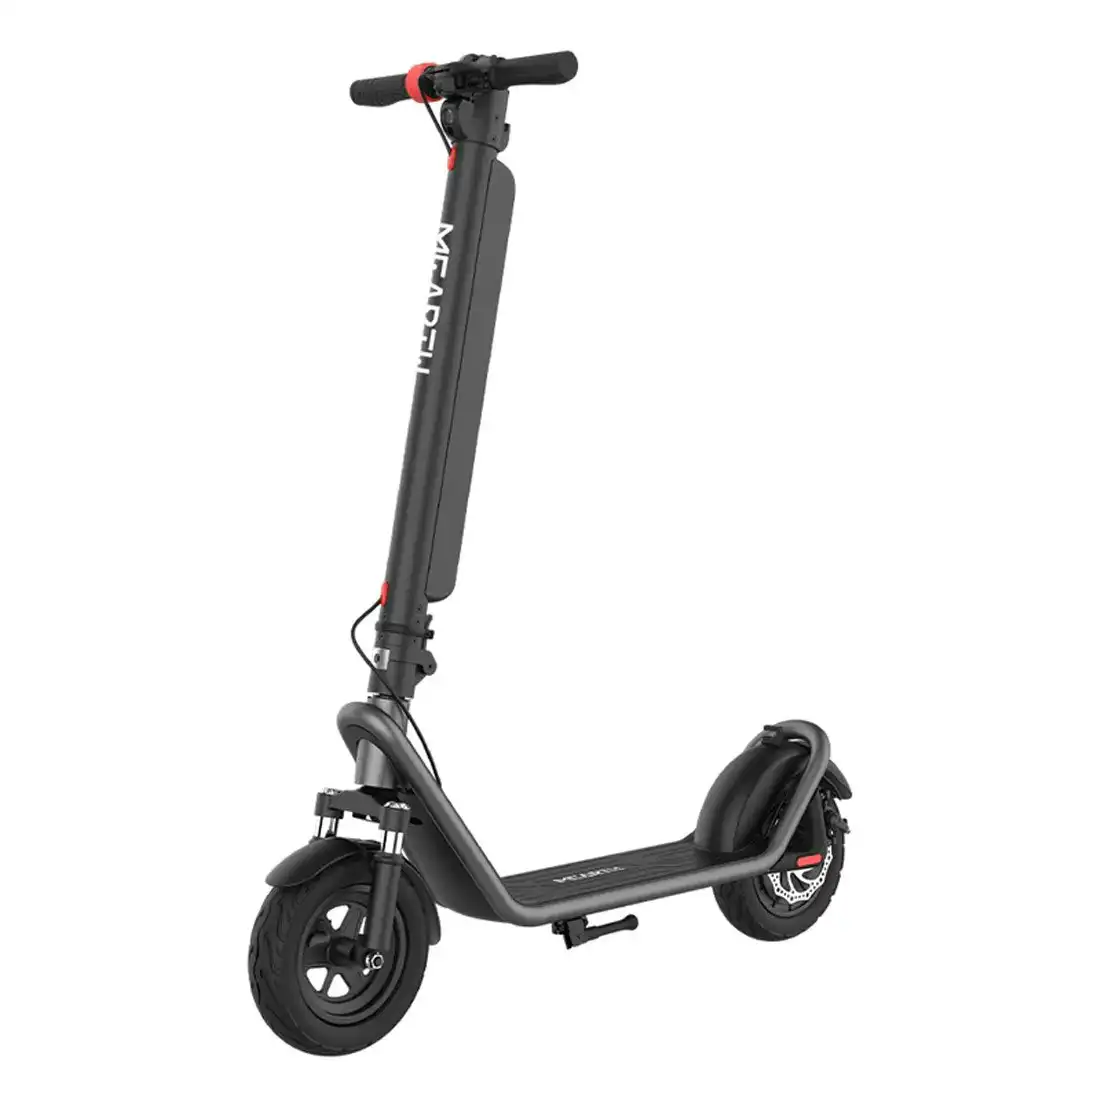 Mearth City Electric Scooter - Black